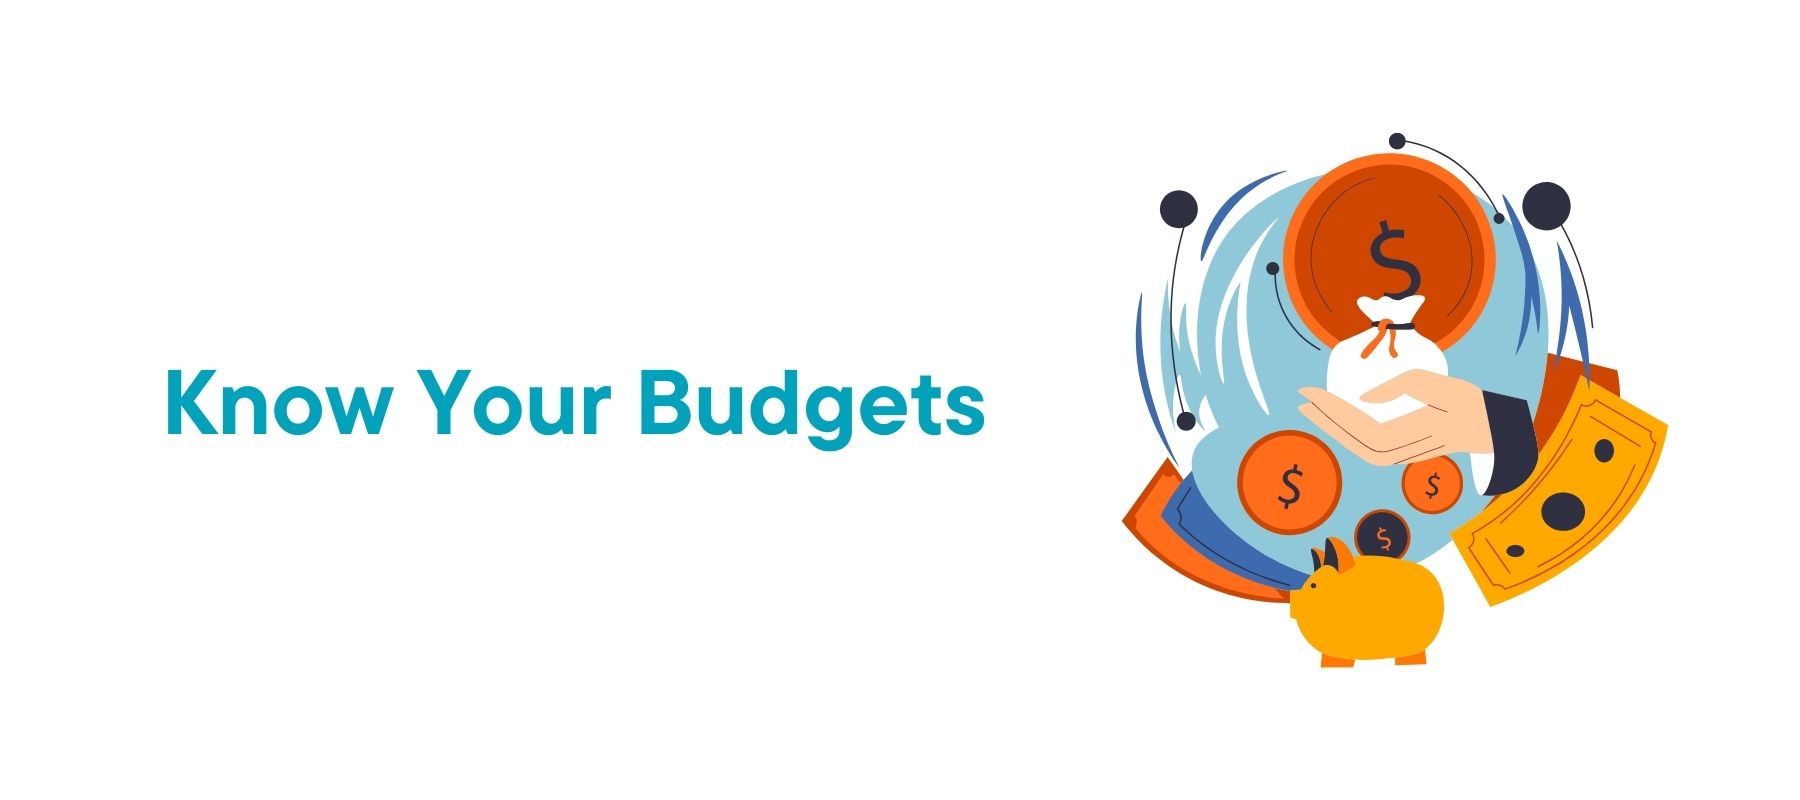 Know Your Budgets